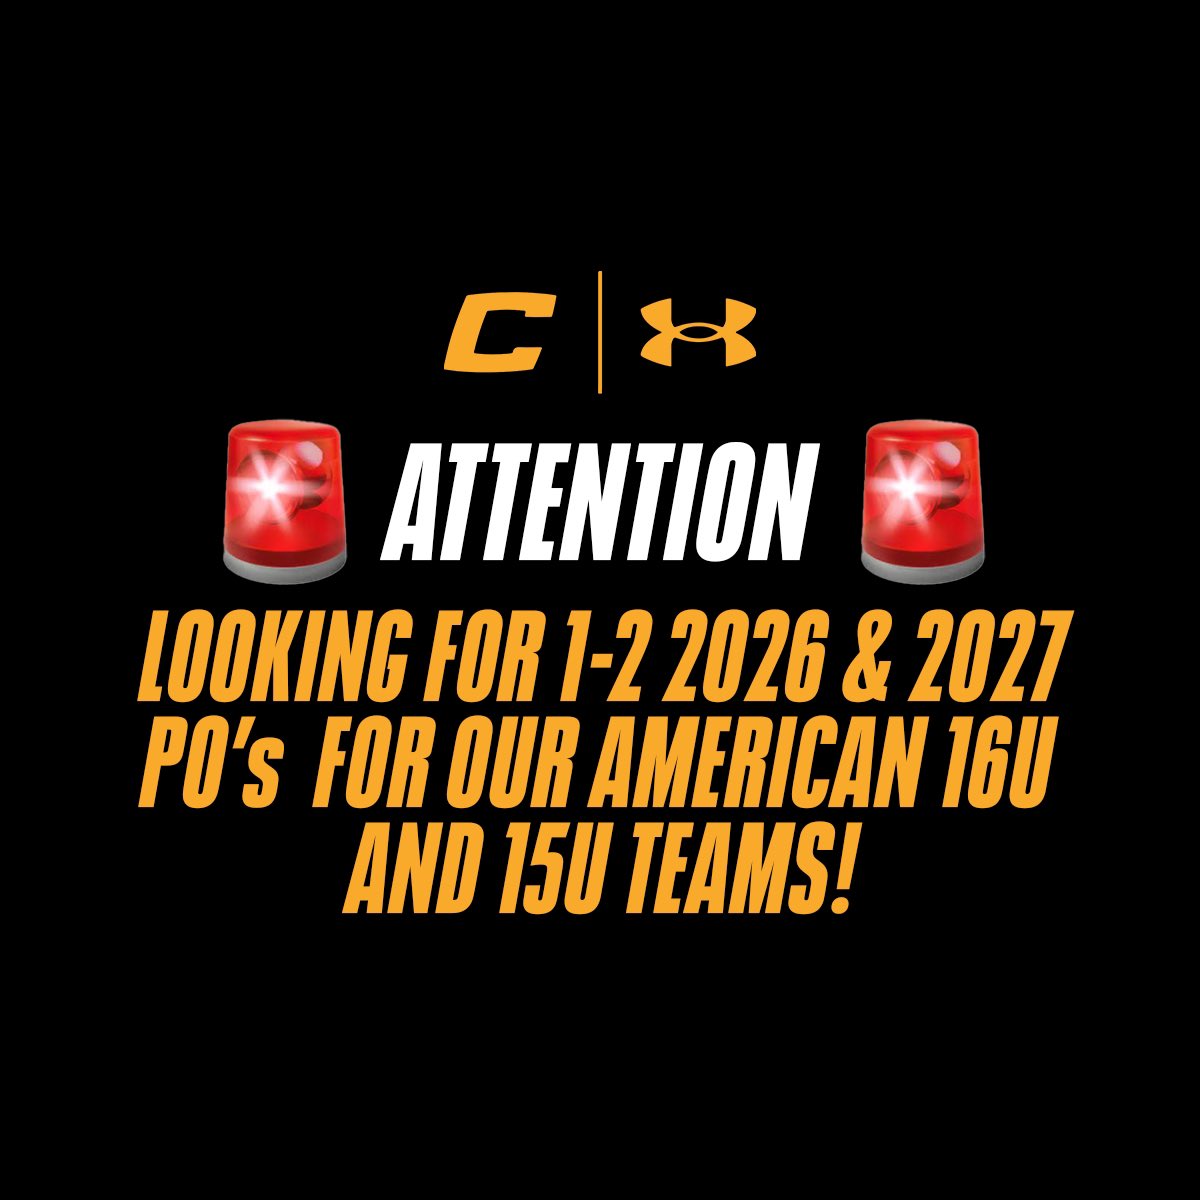 Due to some injuries, we are looking for a couple more arms for our Canes American 15U and 16U teams! If interested, please email aburke@canesbaseball.net or thecanesbaseball@gmail.com #TheCanesBB | #DifferentBrandOfBaseball